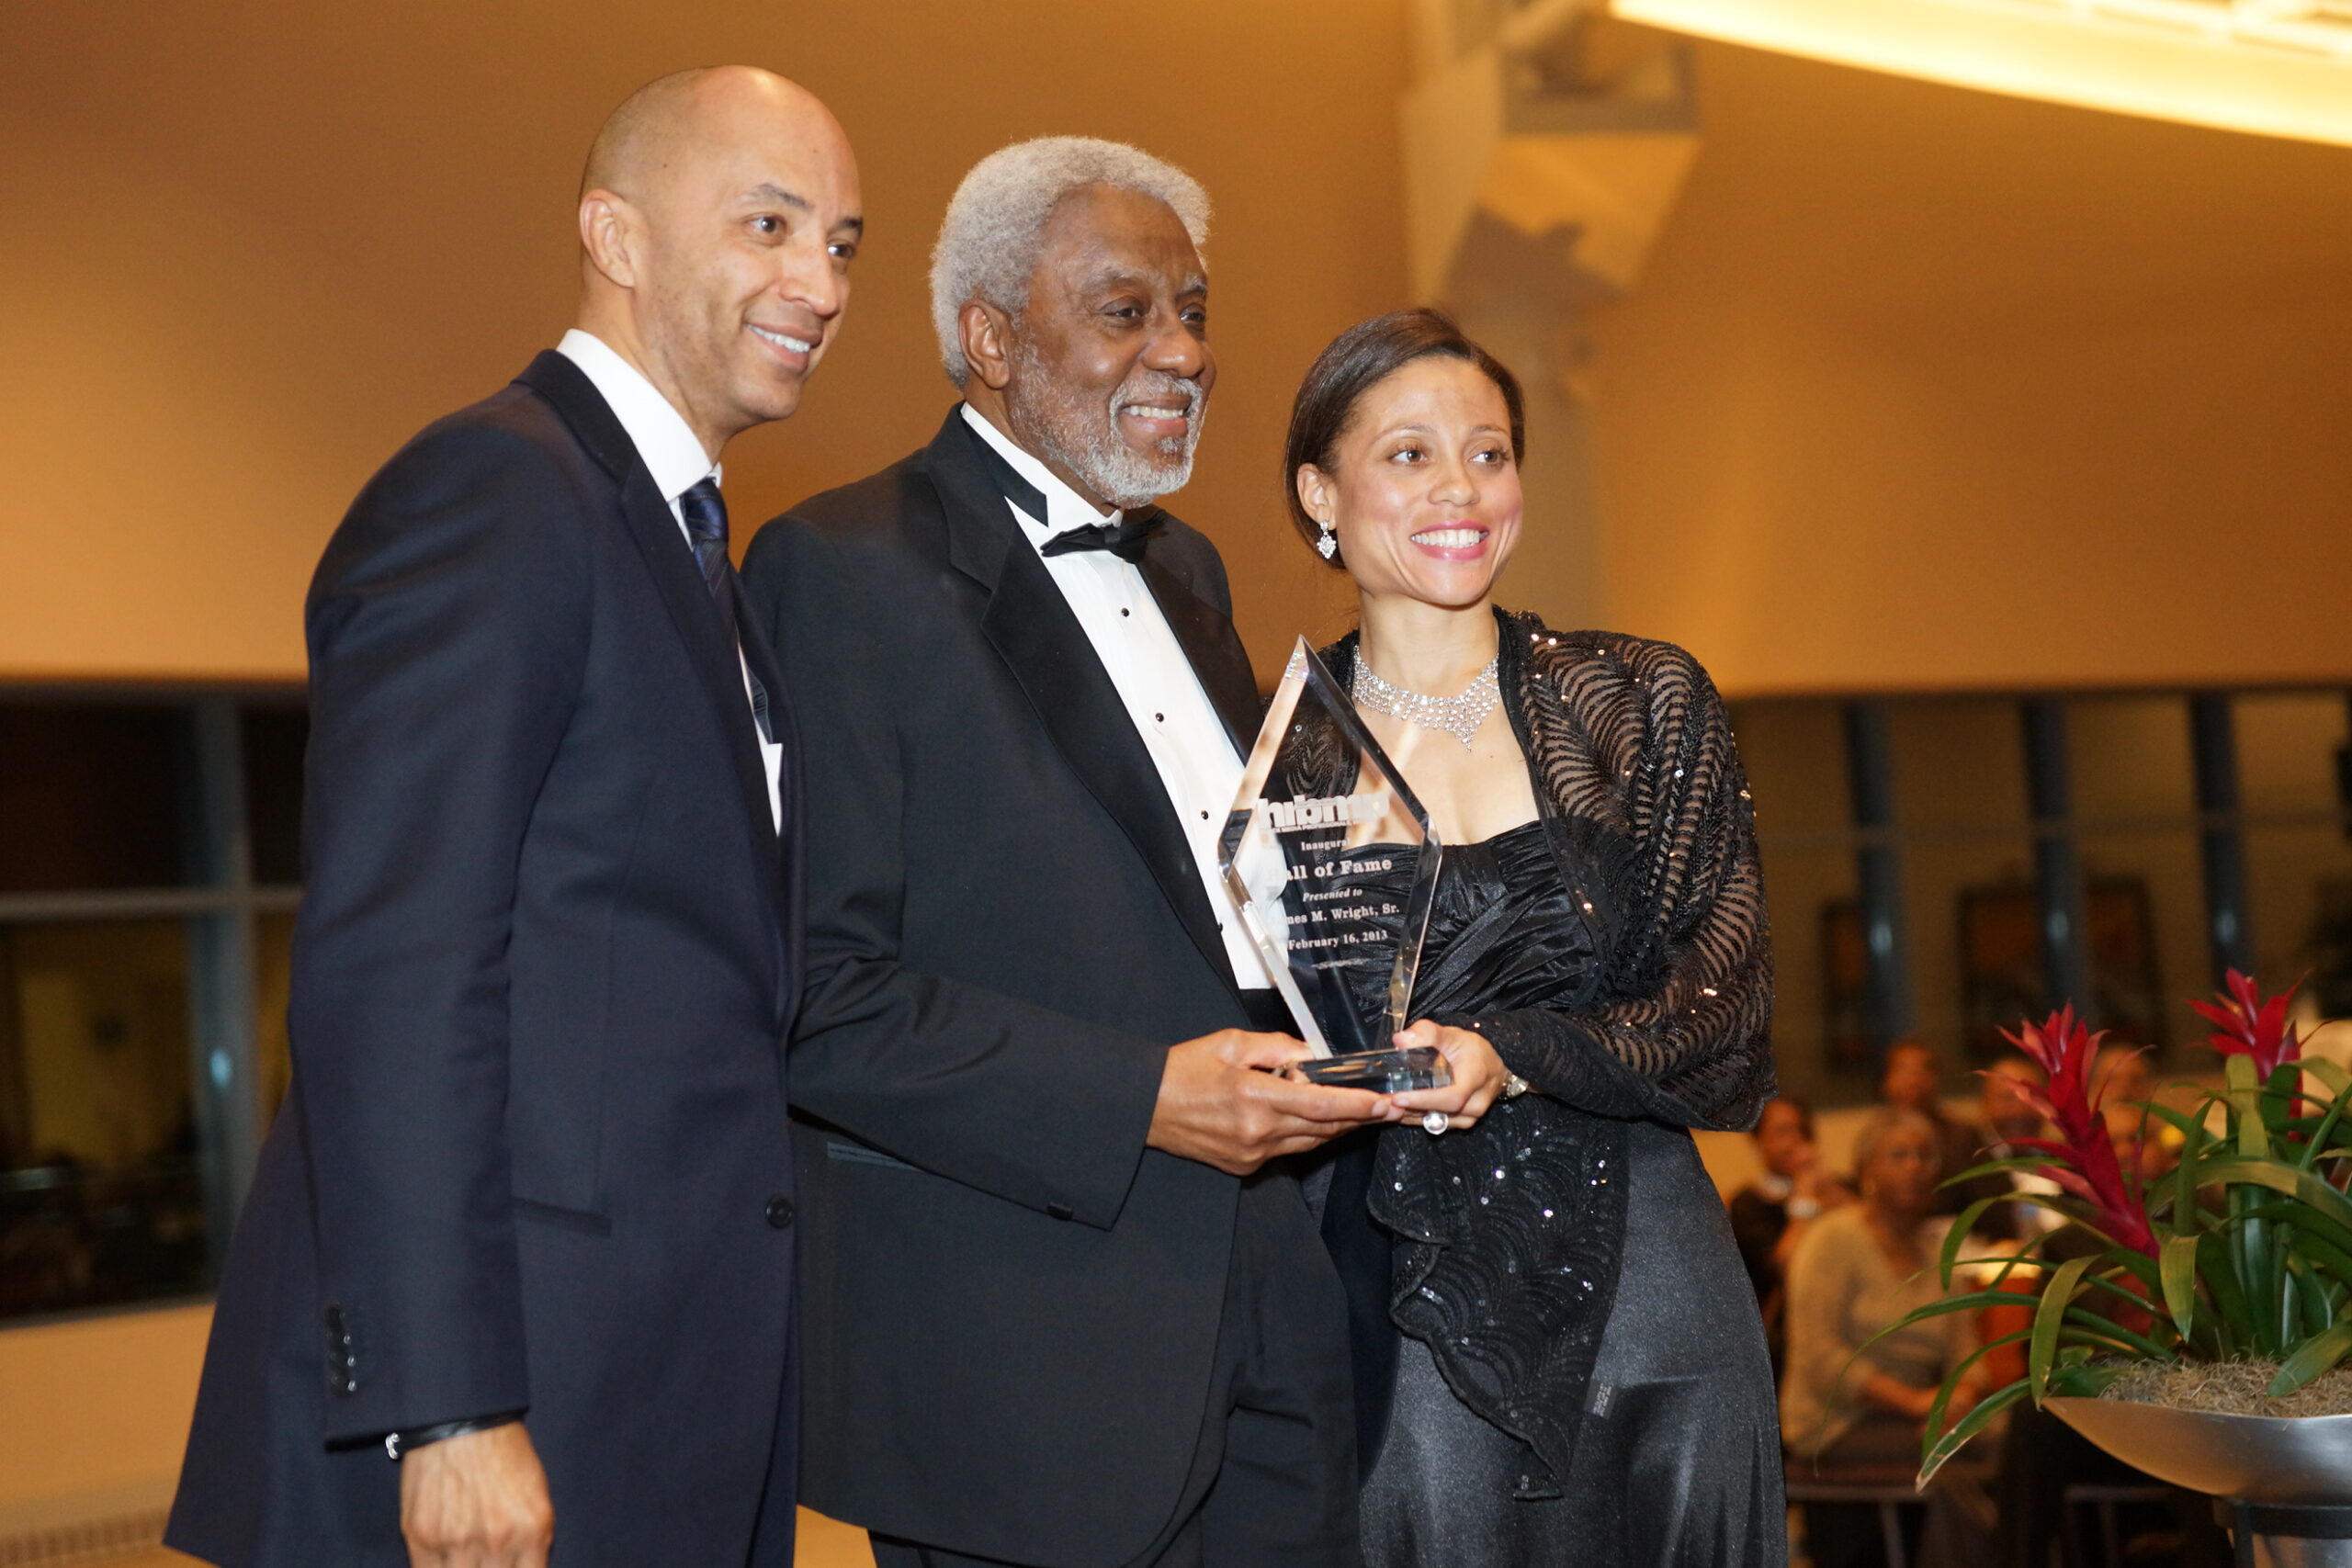 Cheryl and Byron Pitts, ABC News Nightline co-anchor, present an HRBMP Hall of Fame award to late HRBMP founder James M. Wright.